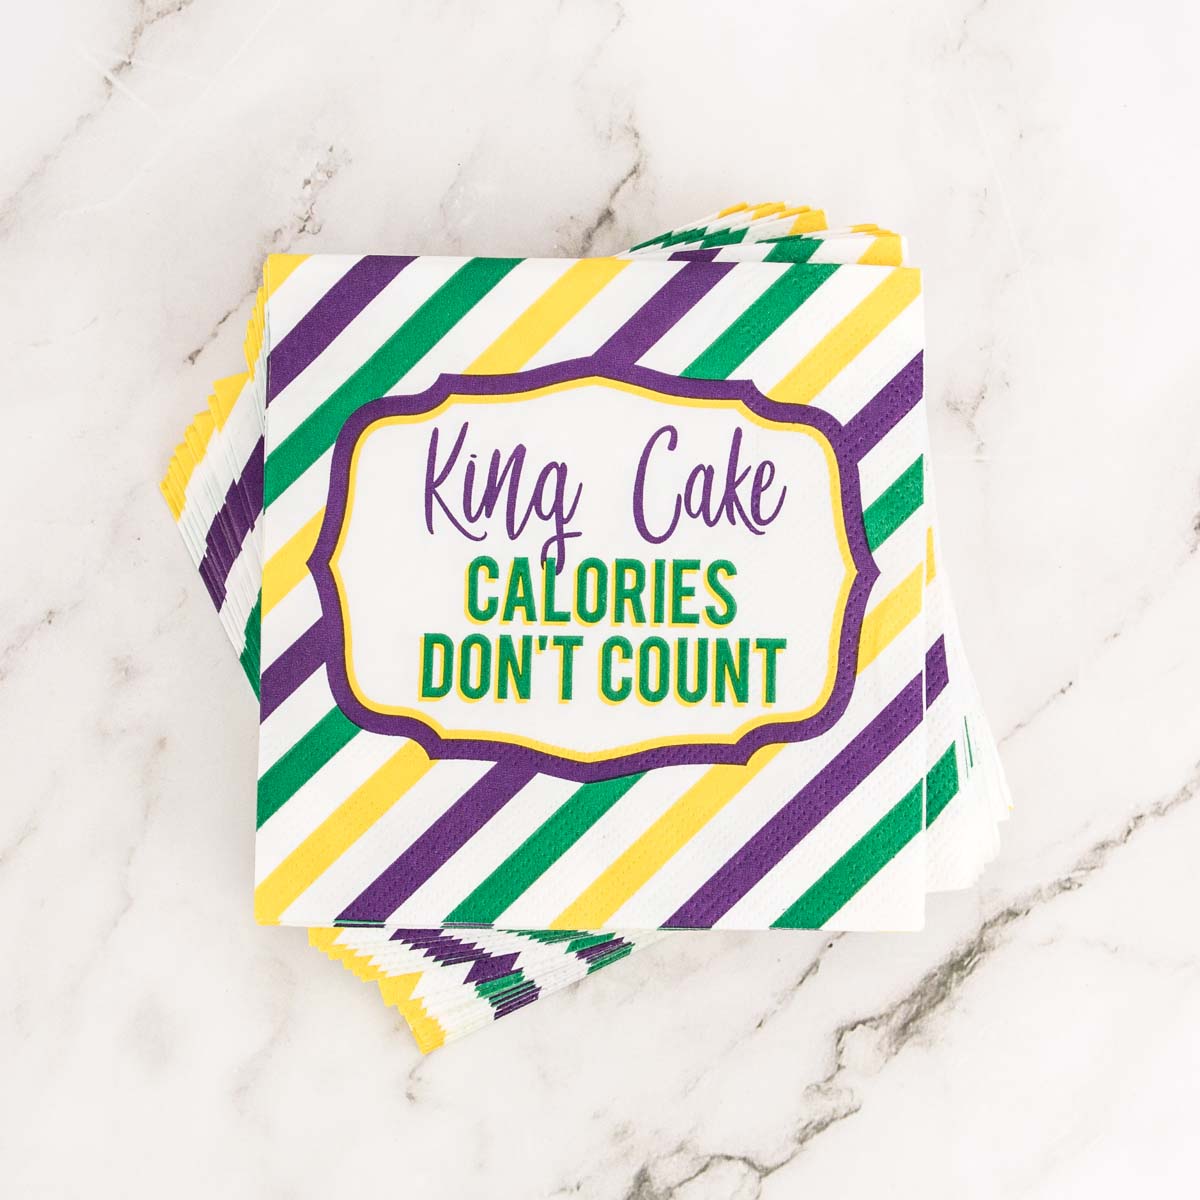 King Cake Calories Cocktail Napkins (Pack of 20)